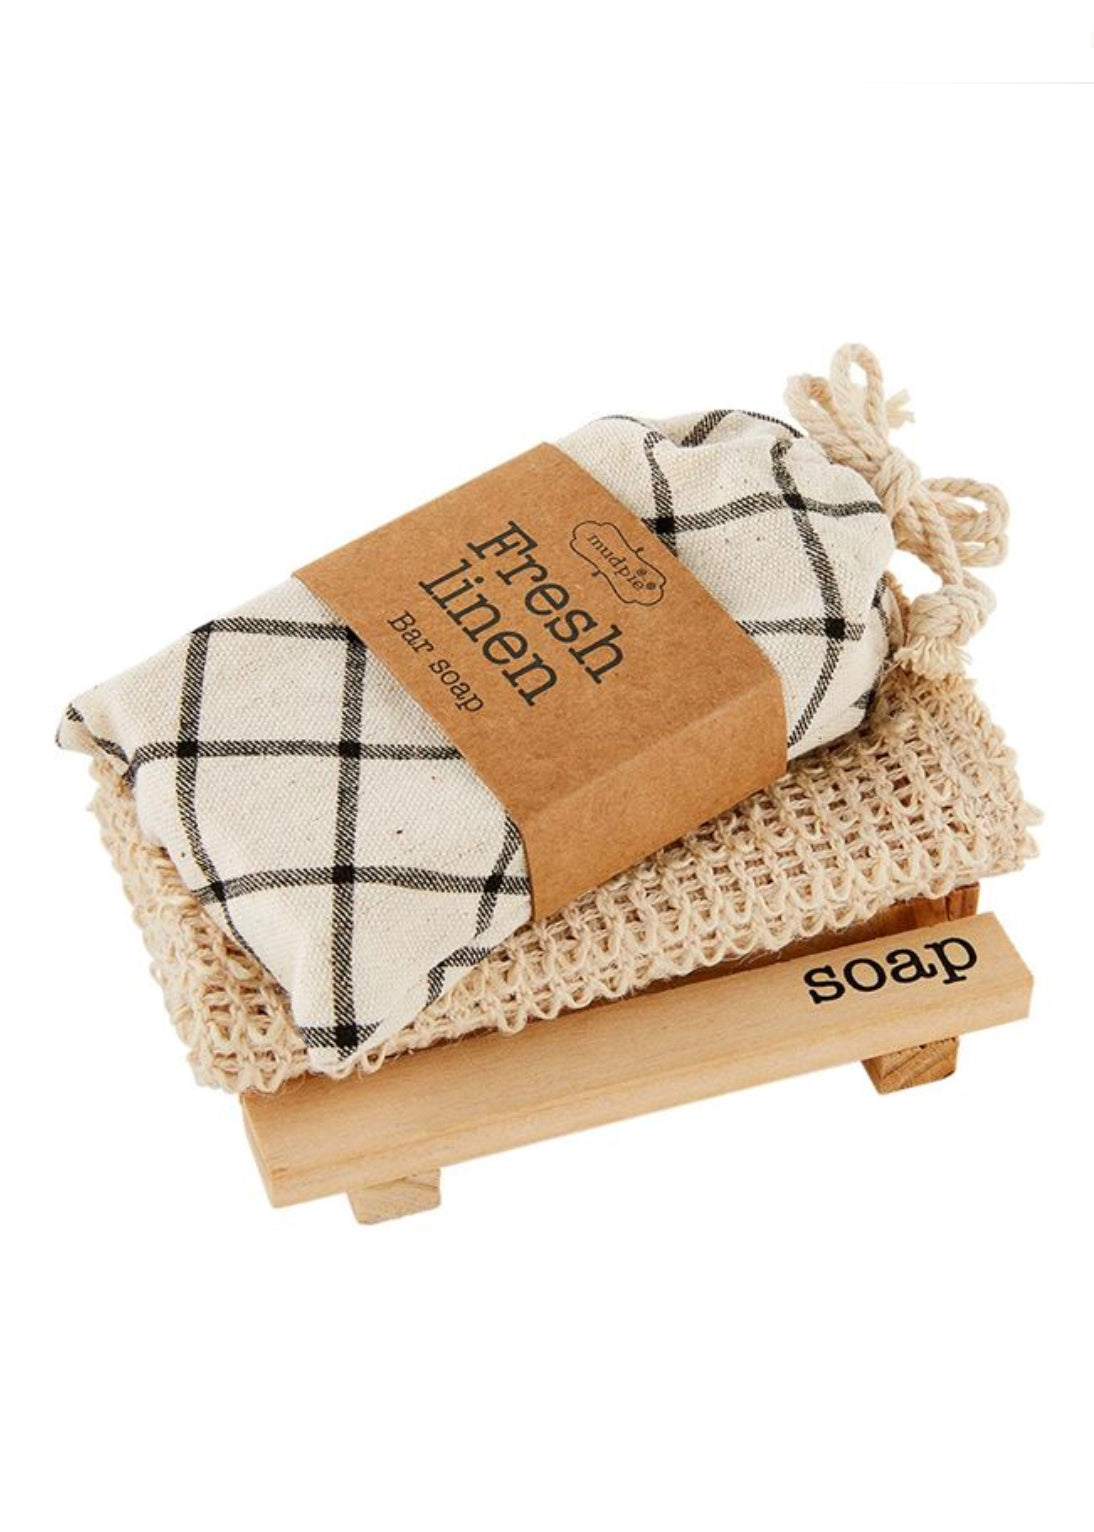 Checked Soap Dish + Cloth Set Home + Lifestyle